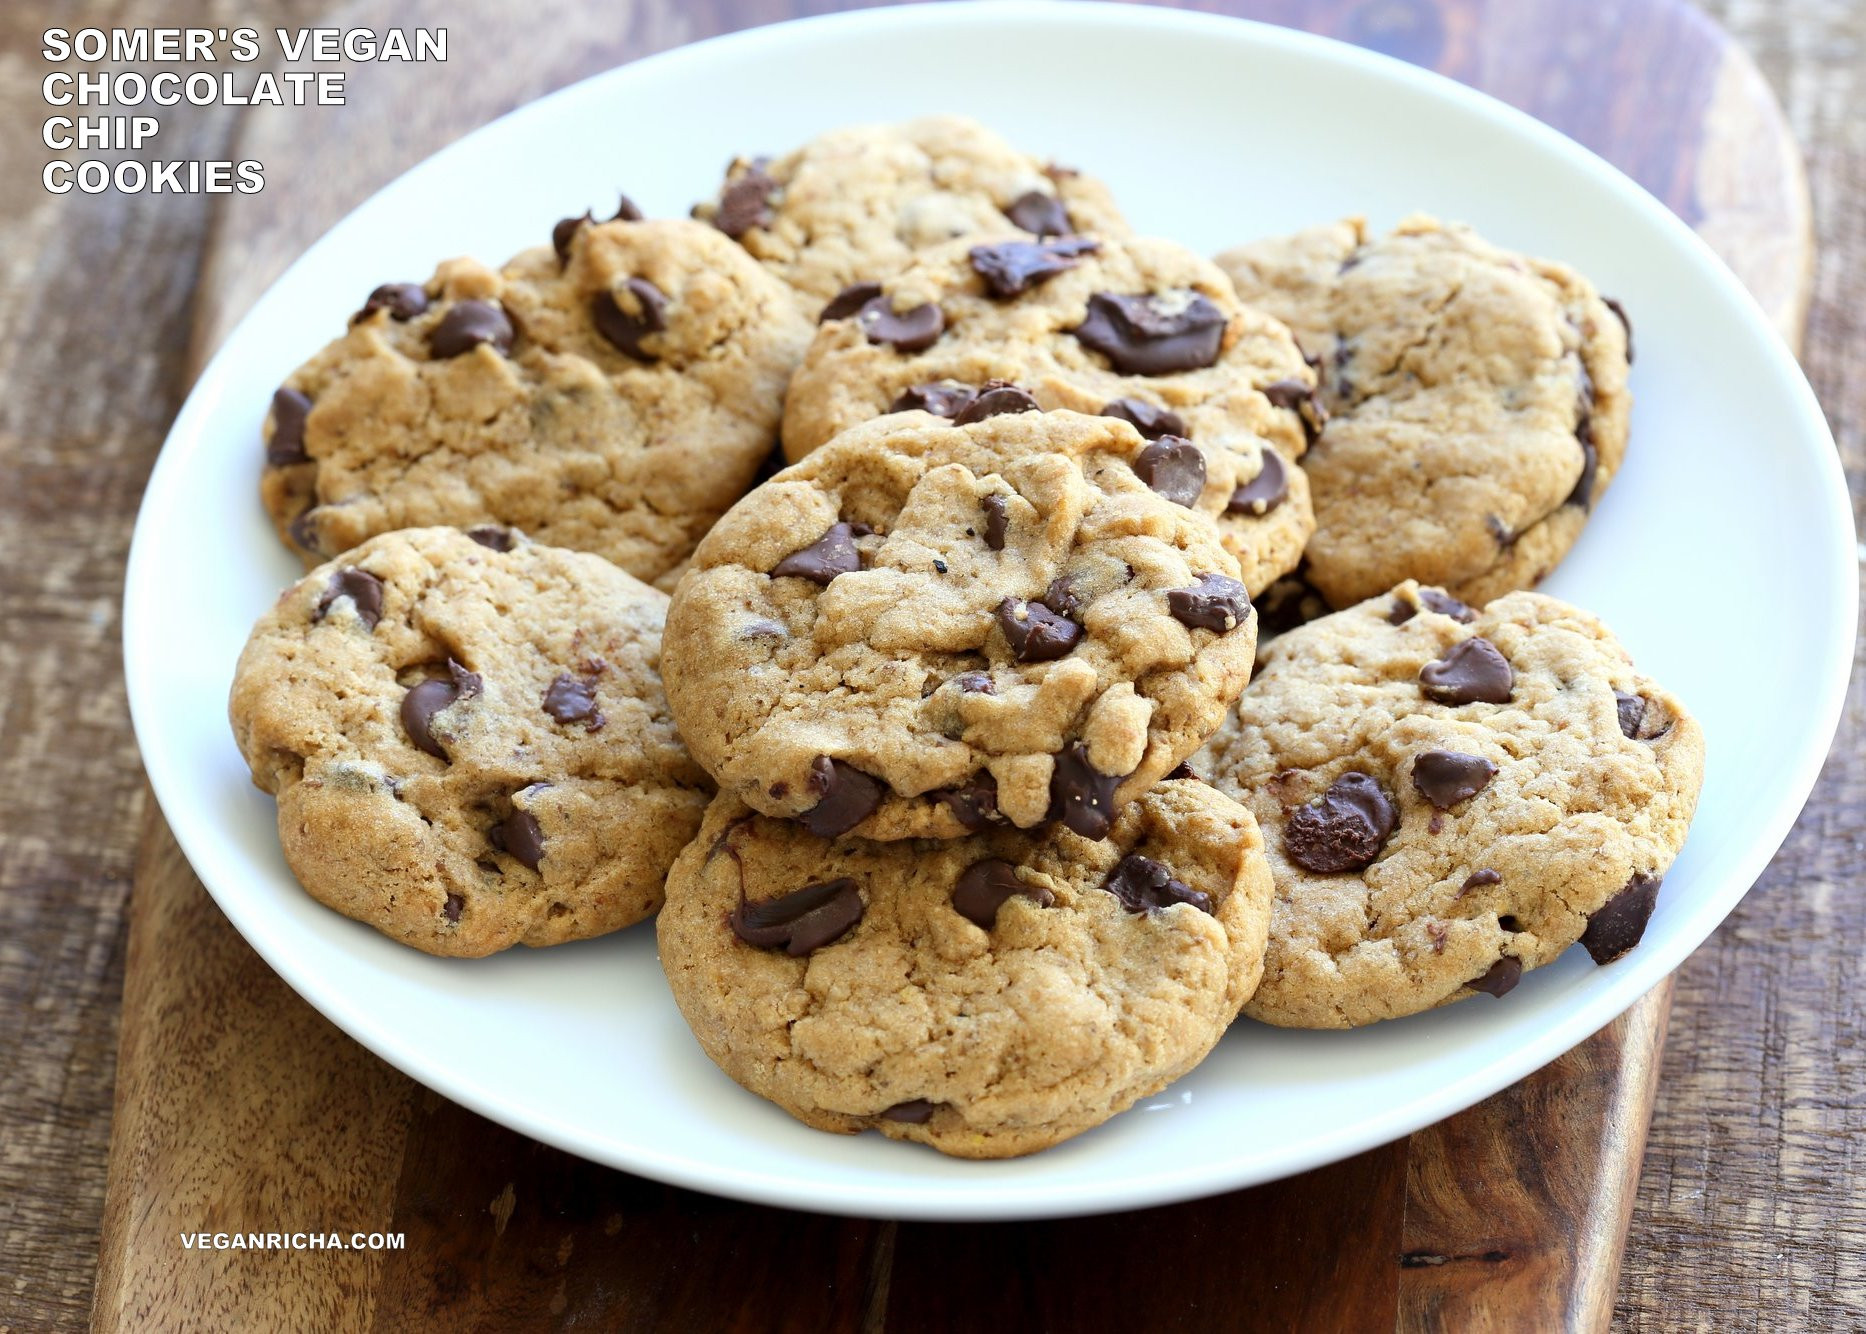 Vegan Treats Recipes
 Vegan Chocolate Chip Cookies with Coconut Oil Palm Oil